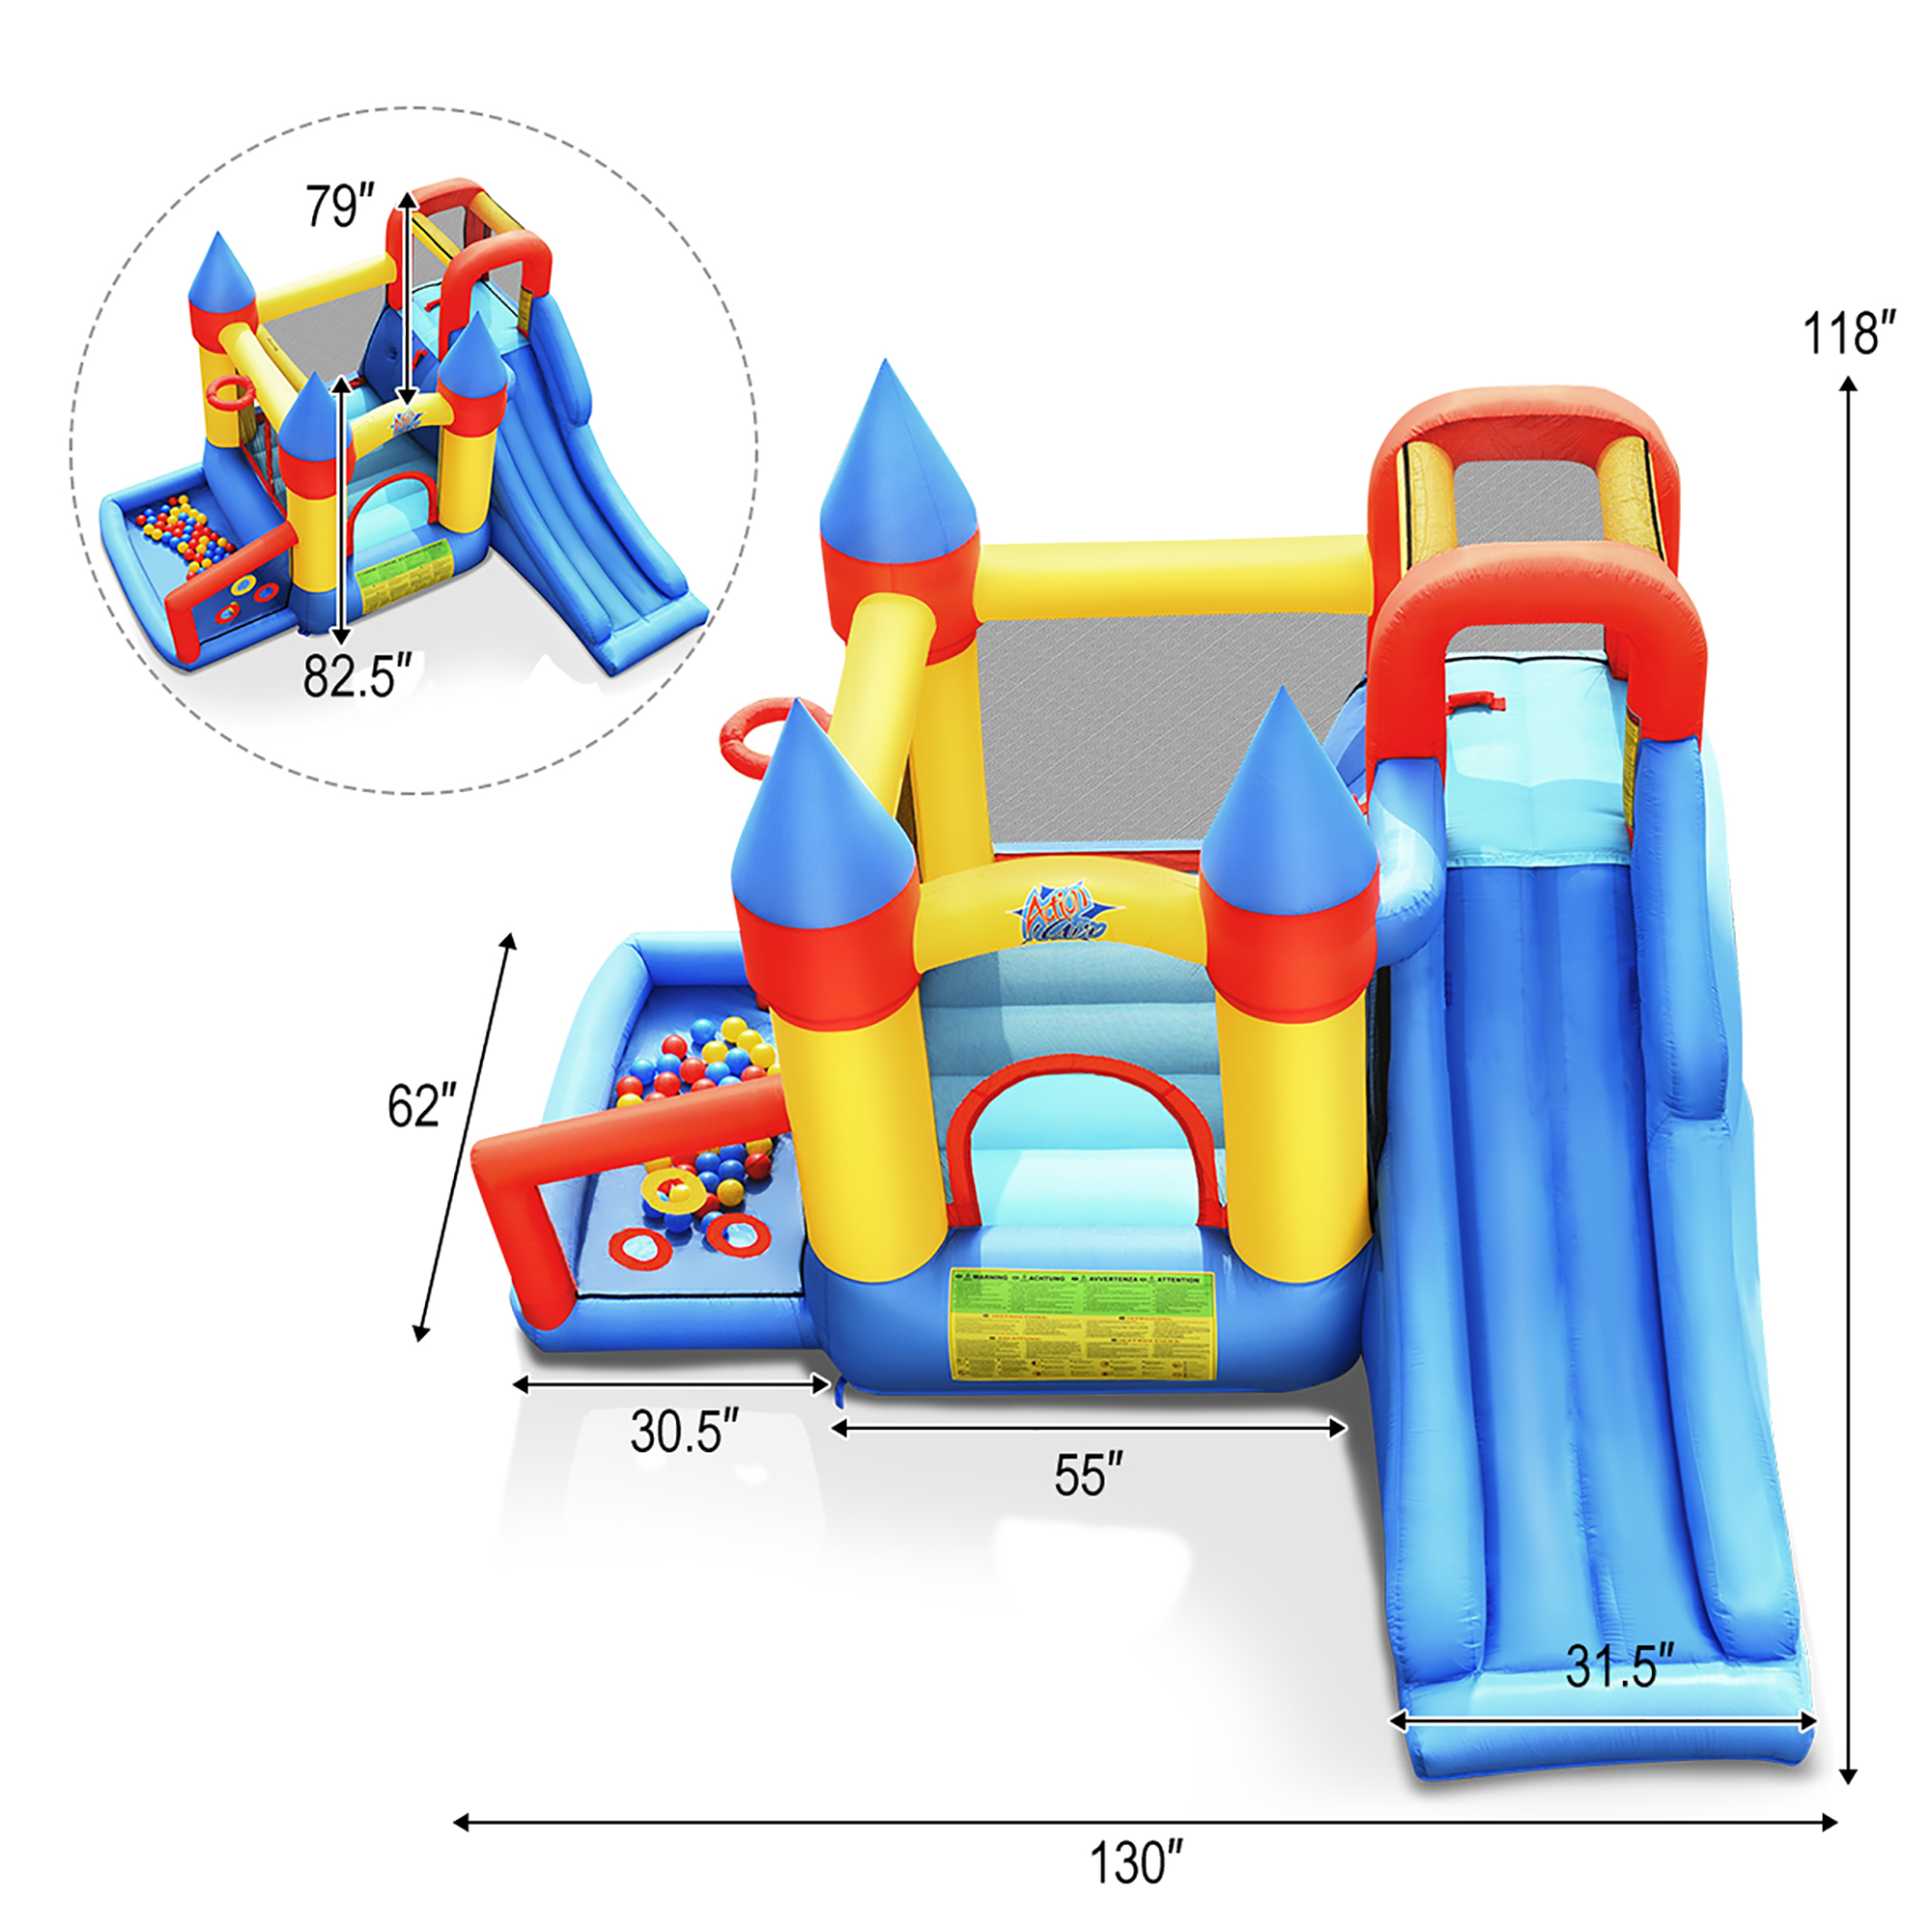 Costway Inflatable Bounce House Slide Bouncer Kids Castle Jumper w/ Balls & 780W Blower - image 2 of 10